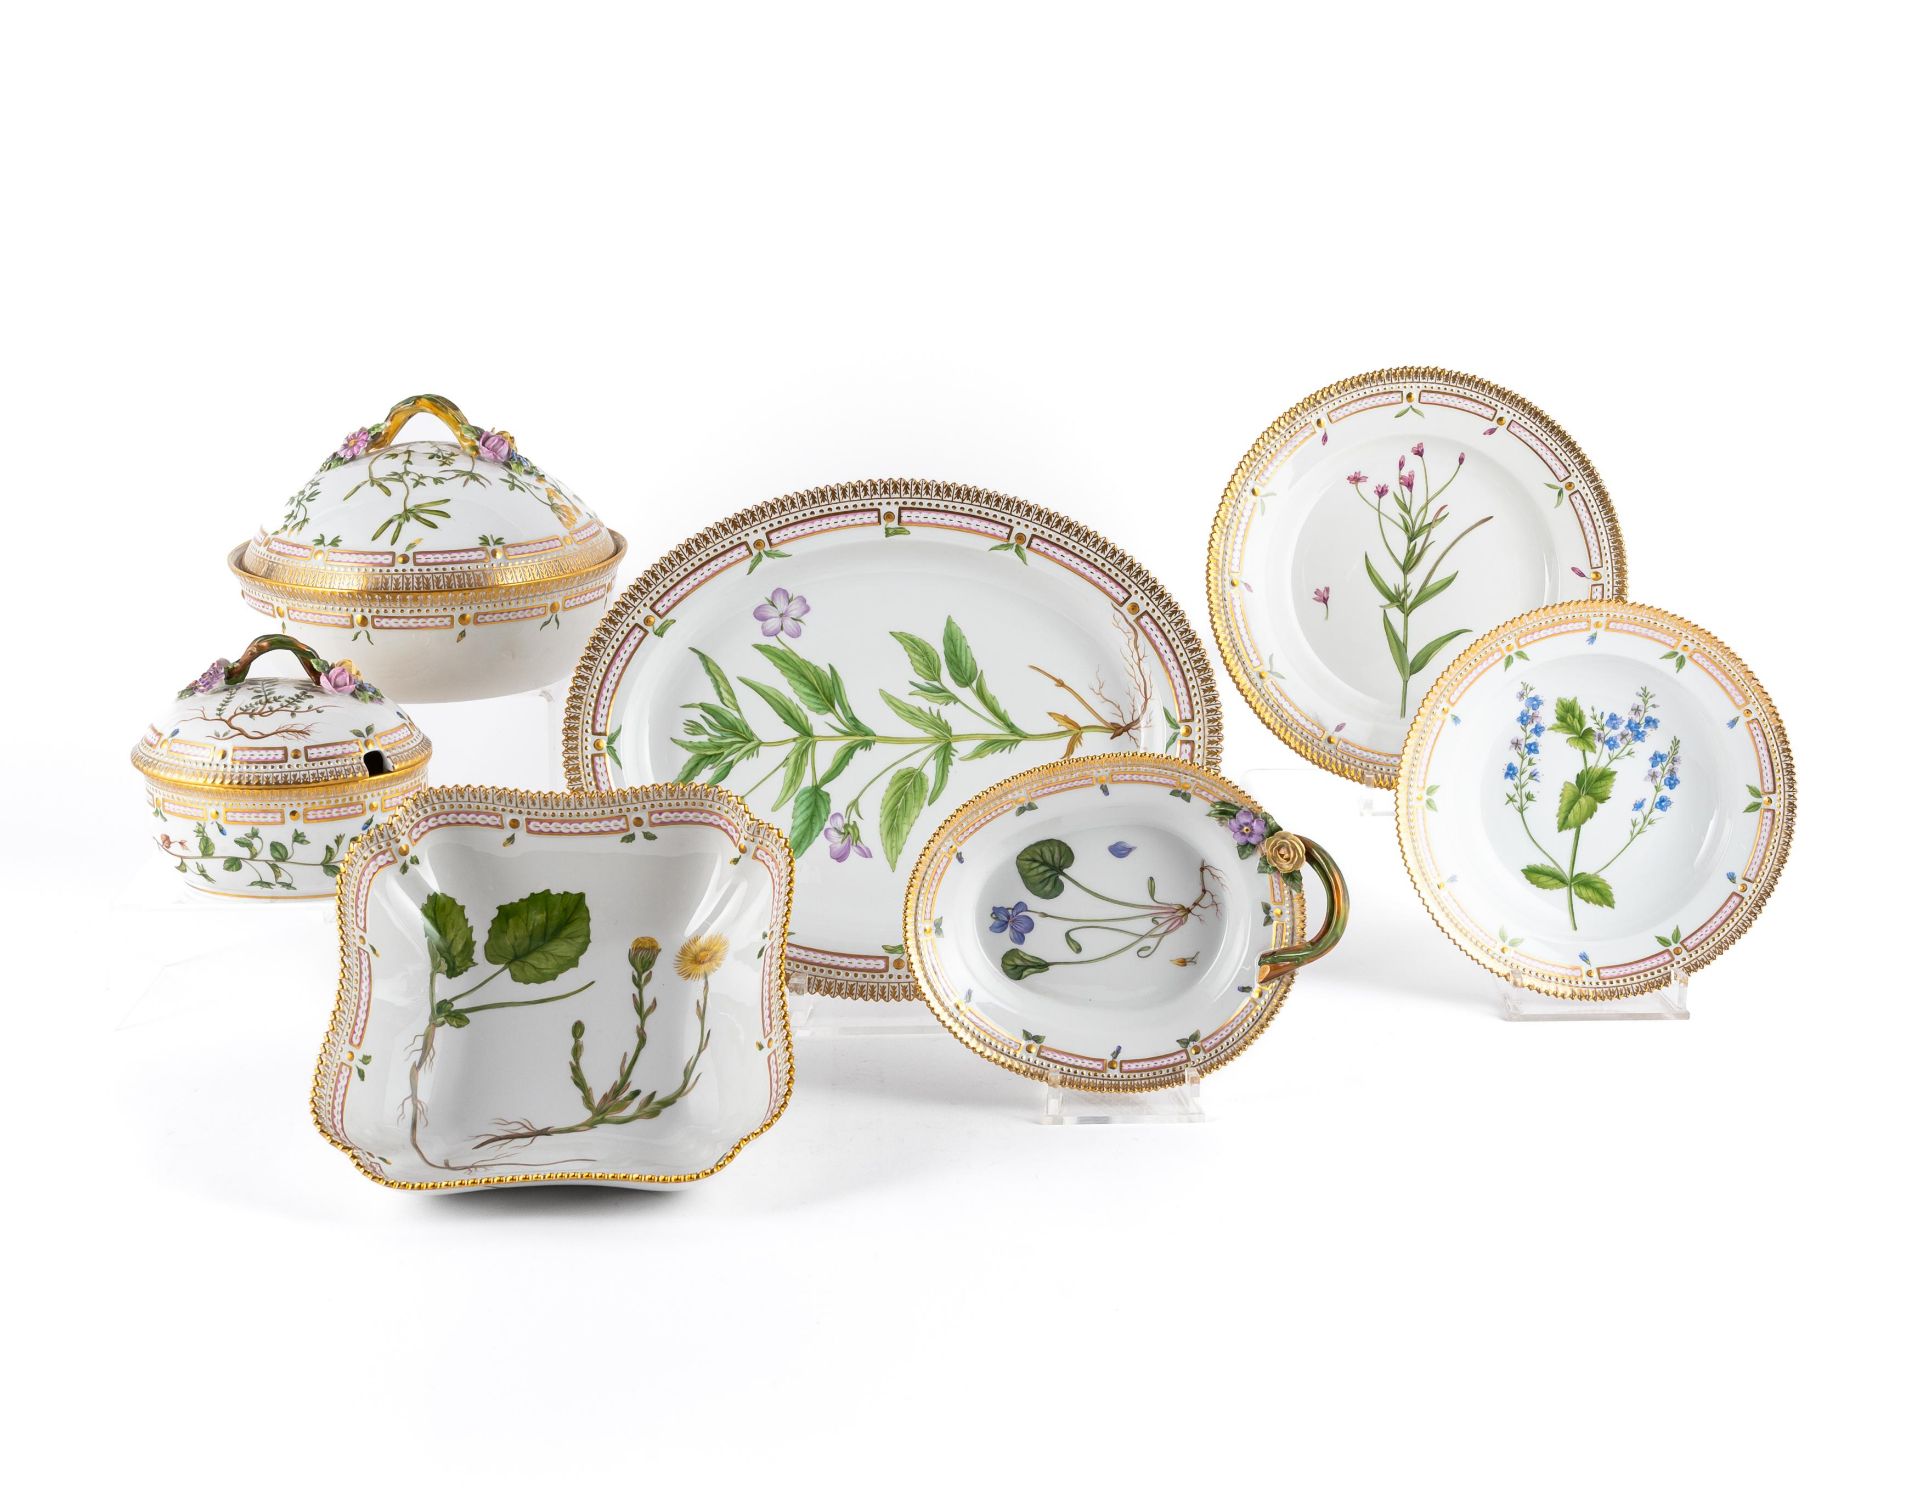 18 PIECES FROM A PORCELAIN DINNER SERVICE 'FLORA DANICA' - Image 2 of 26